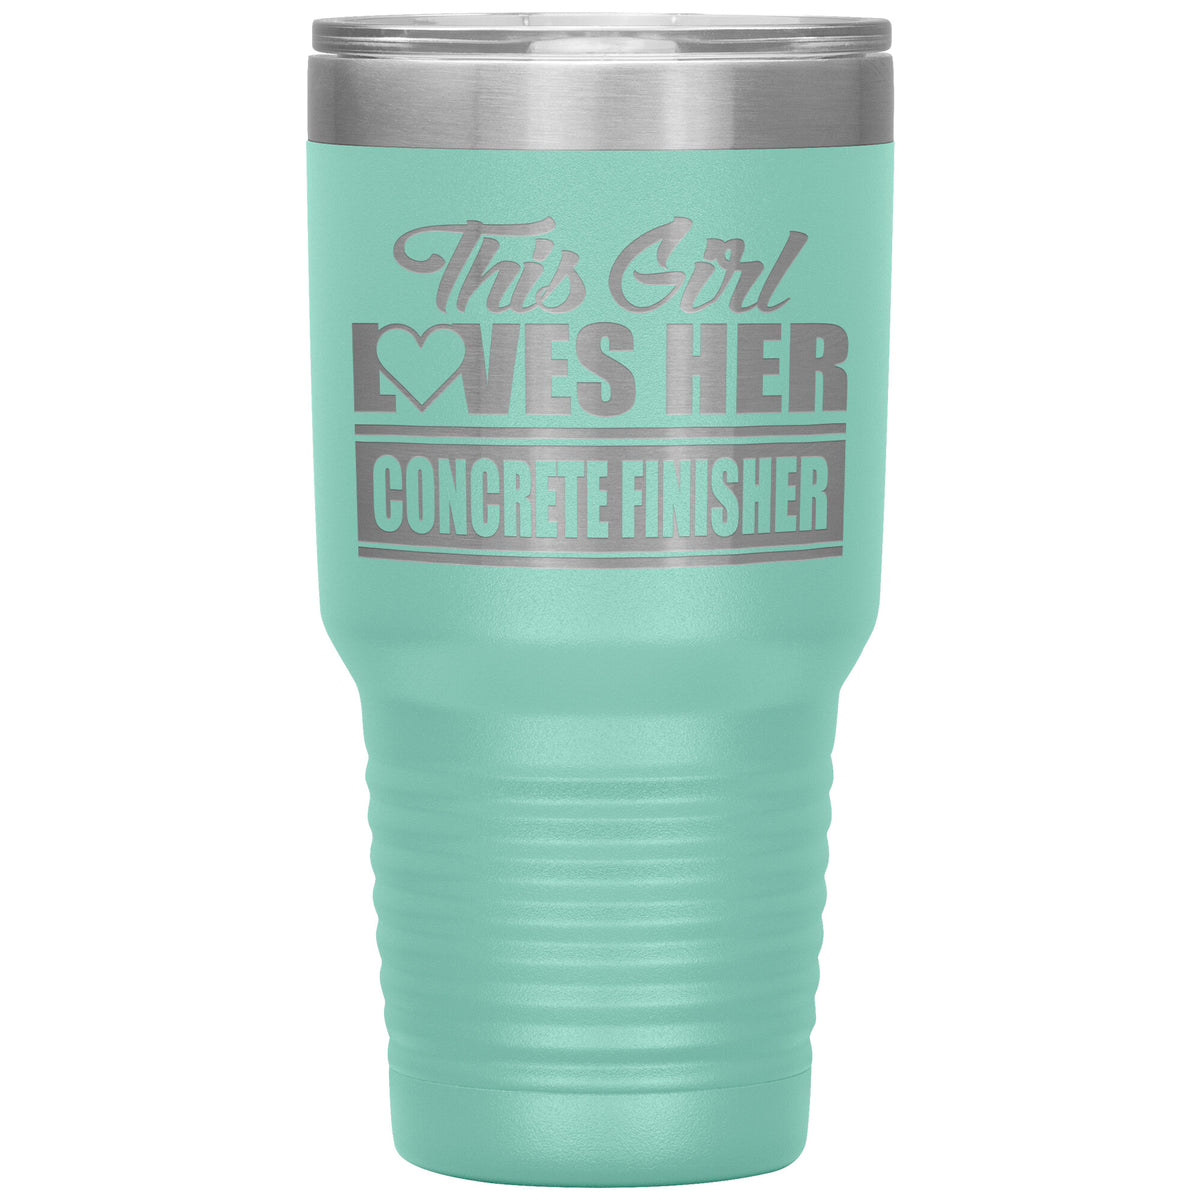 This Girl Loves Her - Concrete Finisher - 30oz Tumbler - Free Shipping